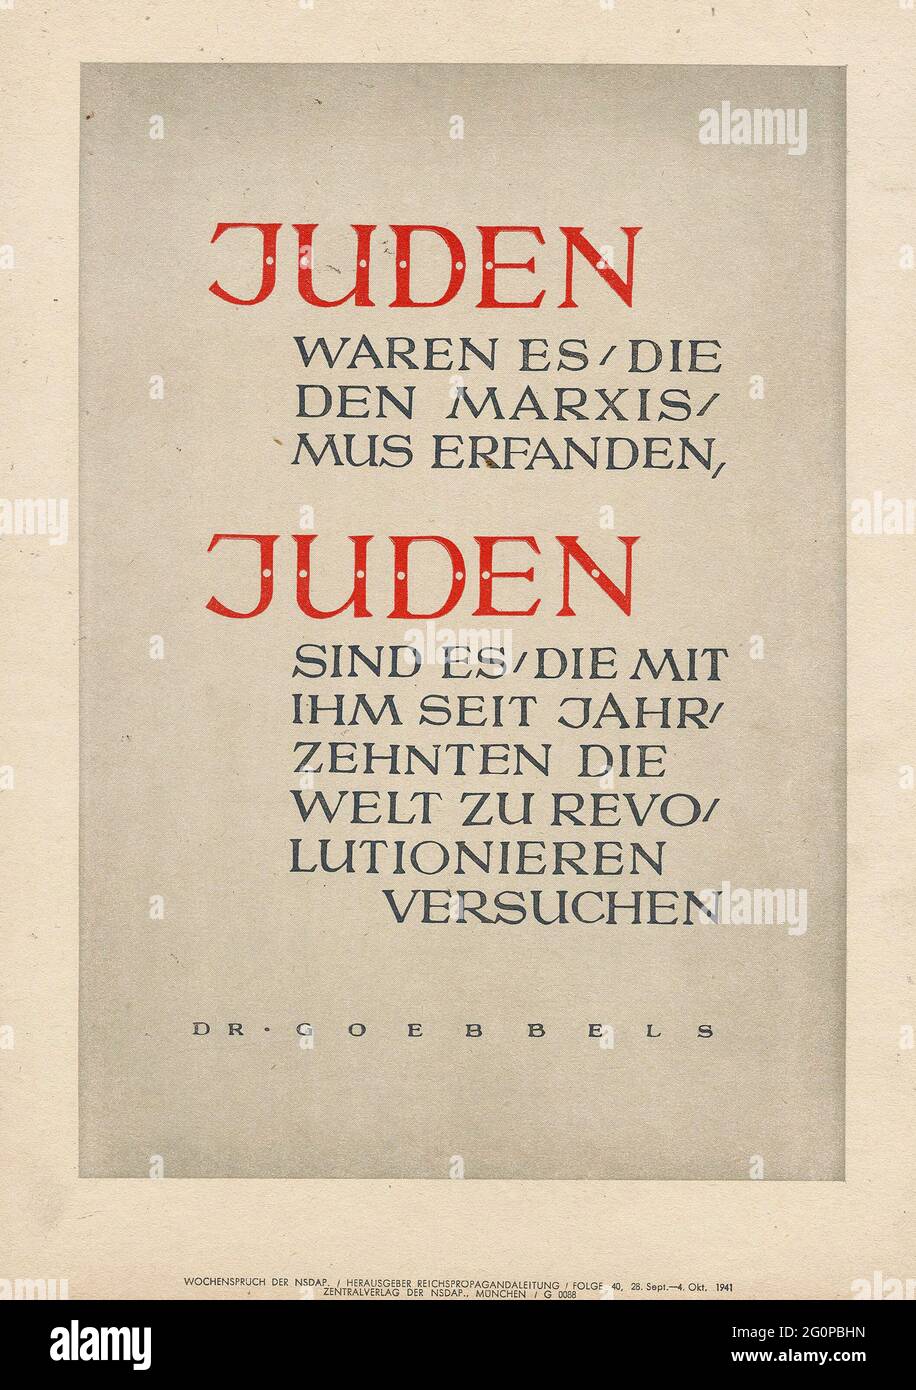 A vintage Nazi propaganda poster with a quotation from Joseph Goebbels linking Jews and Communism Stock Photo